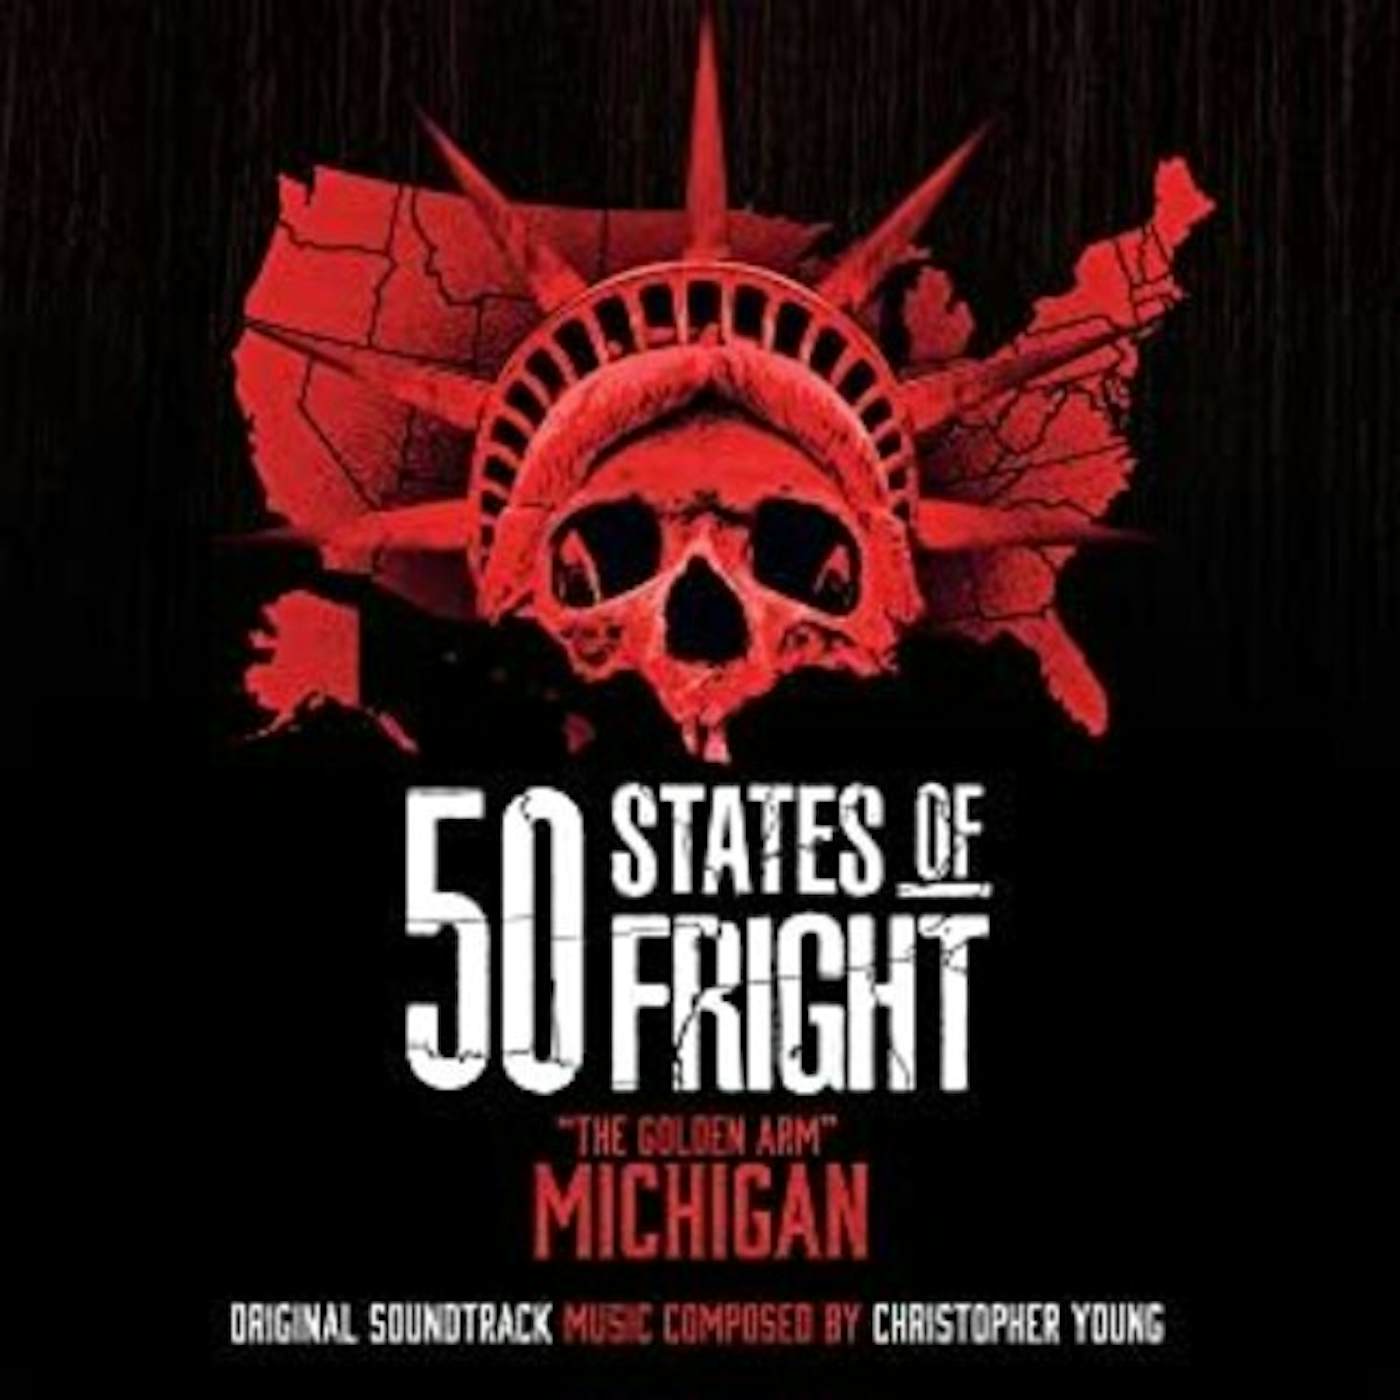 Christopher Young 50 STATES OF FRIGHT: GOLDEN ARM (MICHIGAN) / Original Soundtrack CD